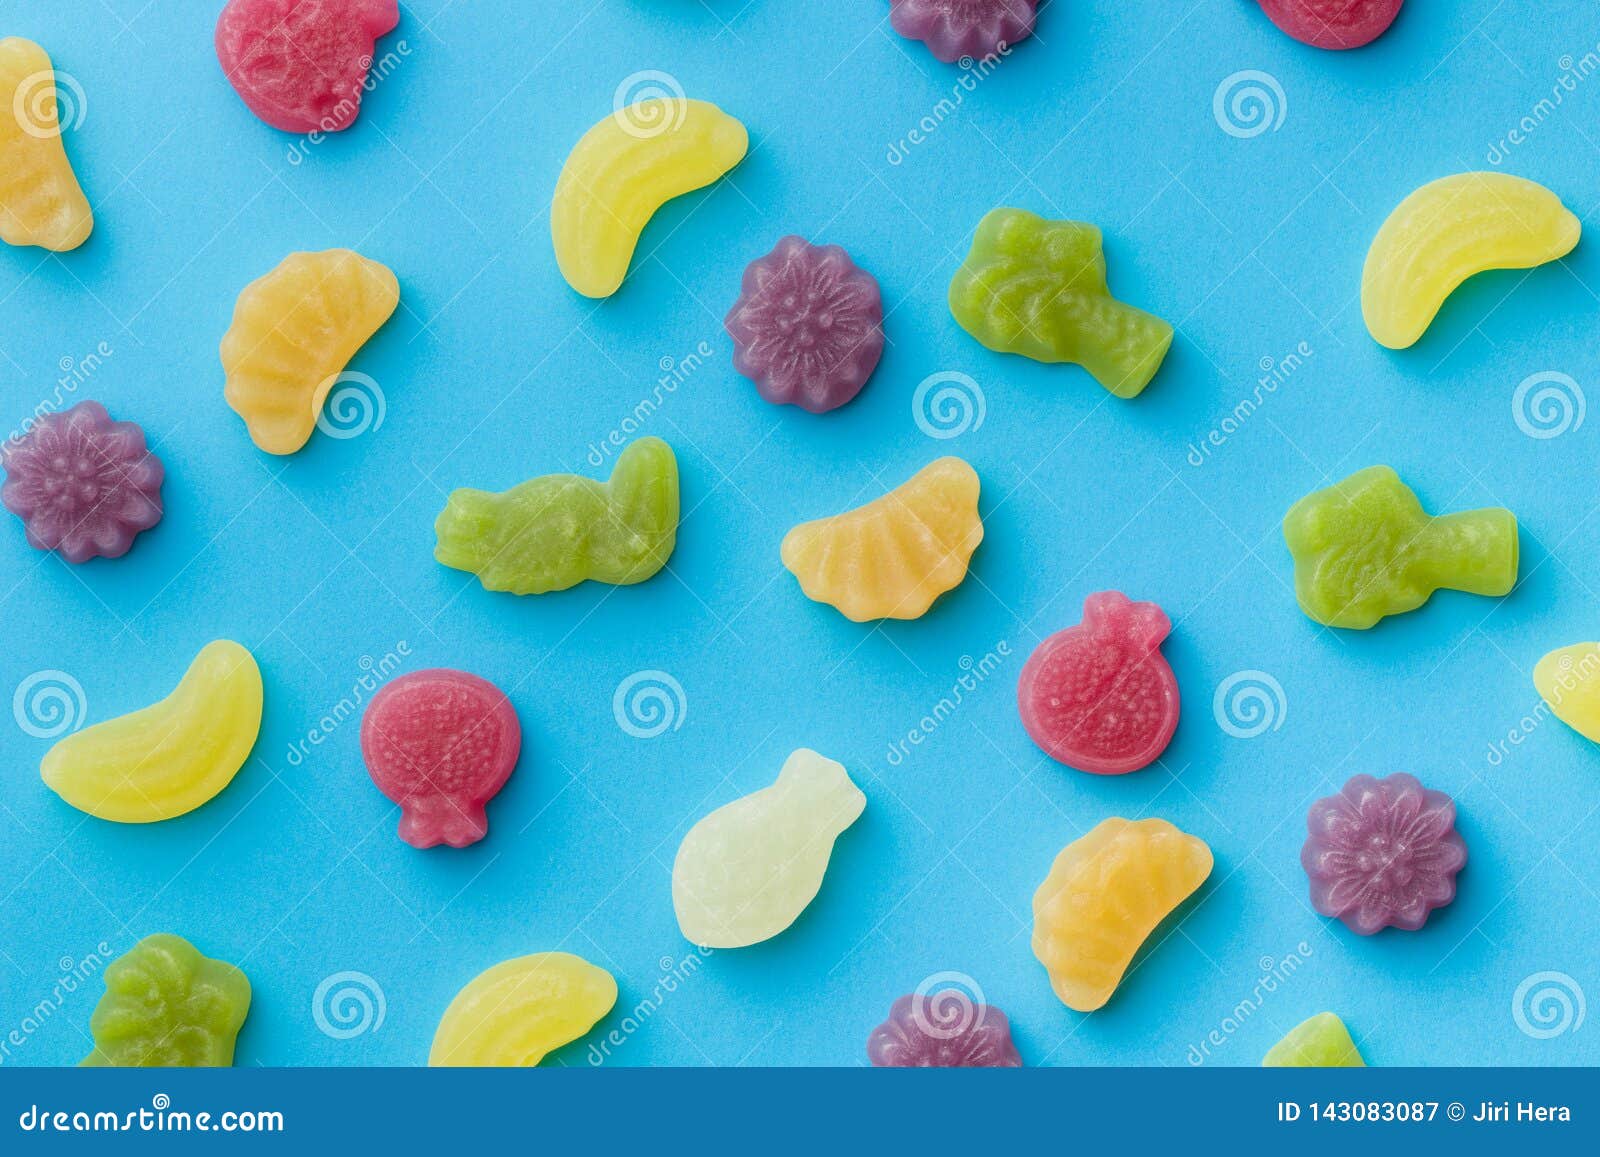 Fruit jelly candies stock image. Image of fruit, jelly - 143083087